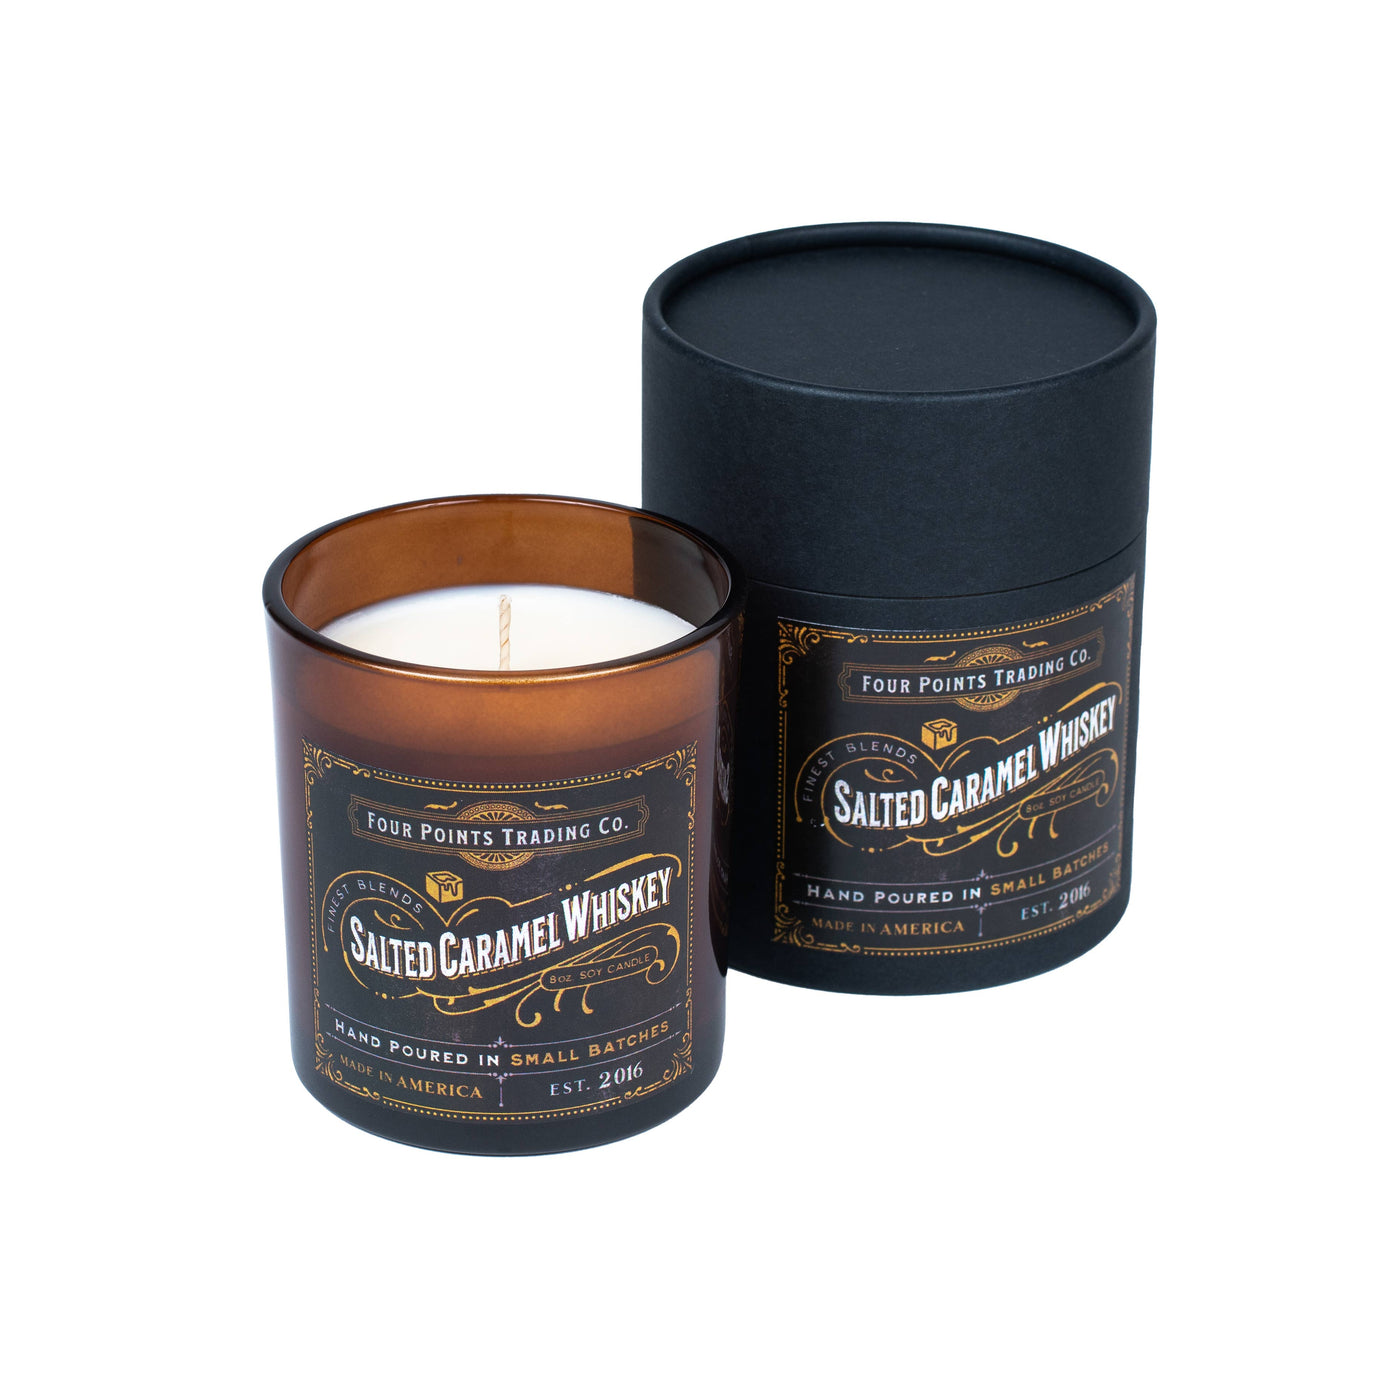 Four Points Trading Co - Salted Caramel Whiskey 8 oz Soy Candle